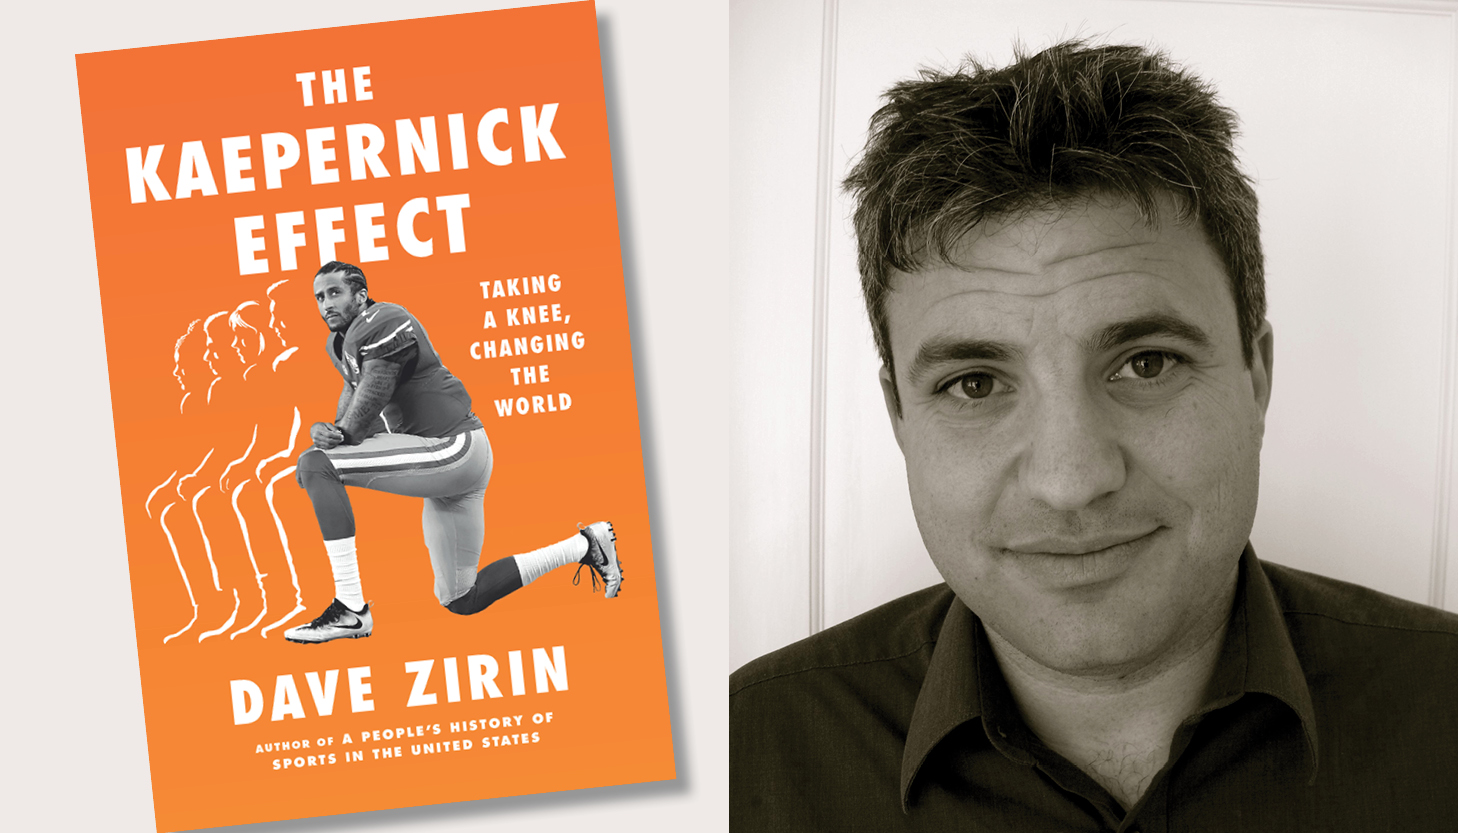 An image of the cover of the book The Kaepernick Effect and author Dave Zirin